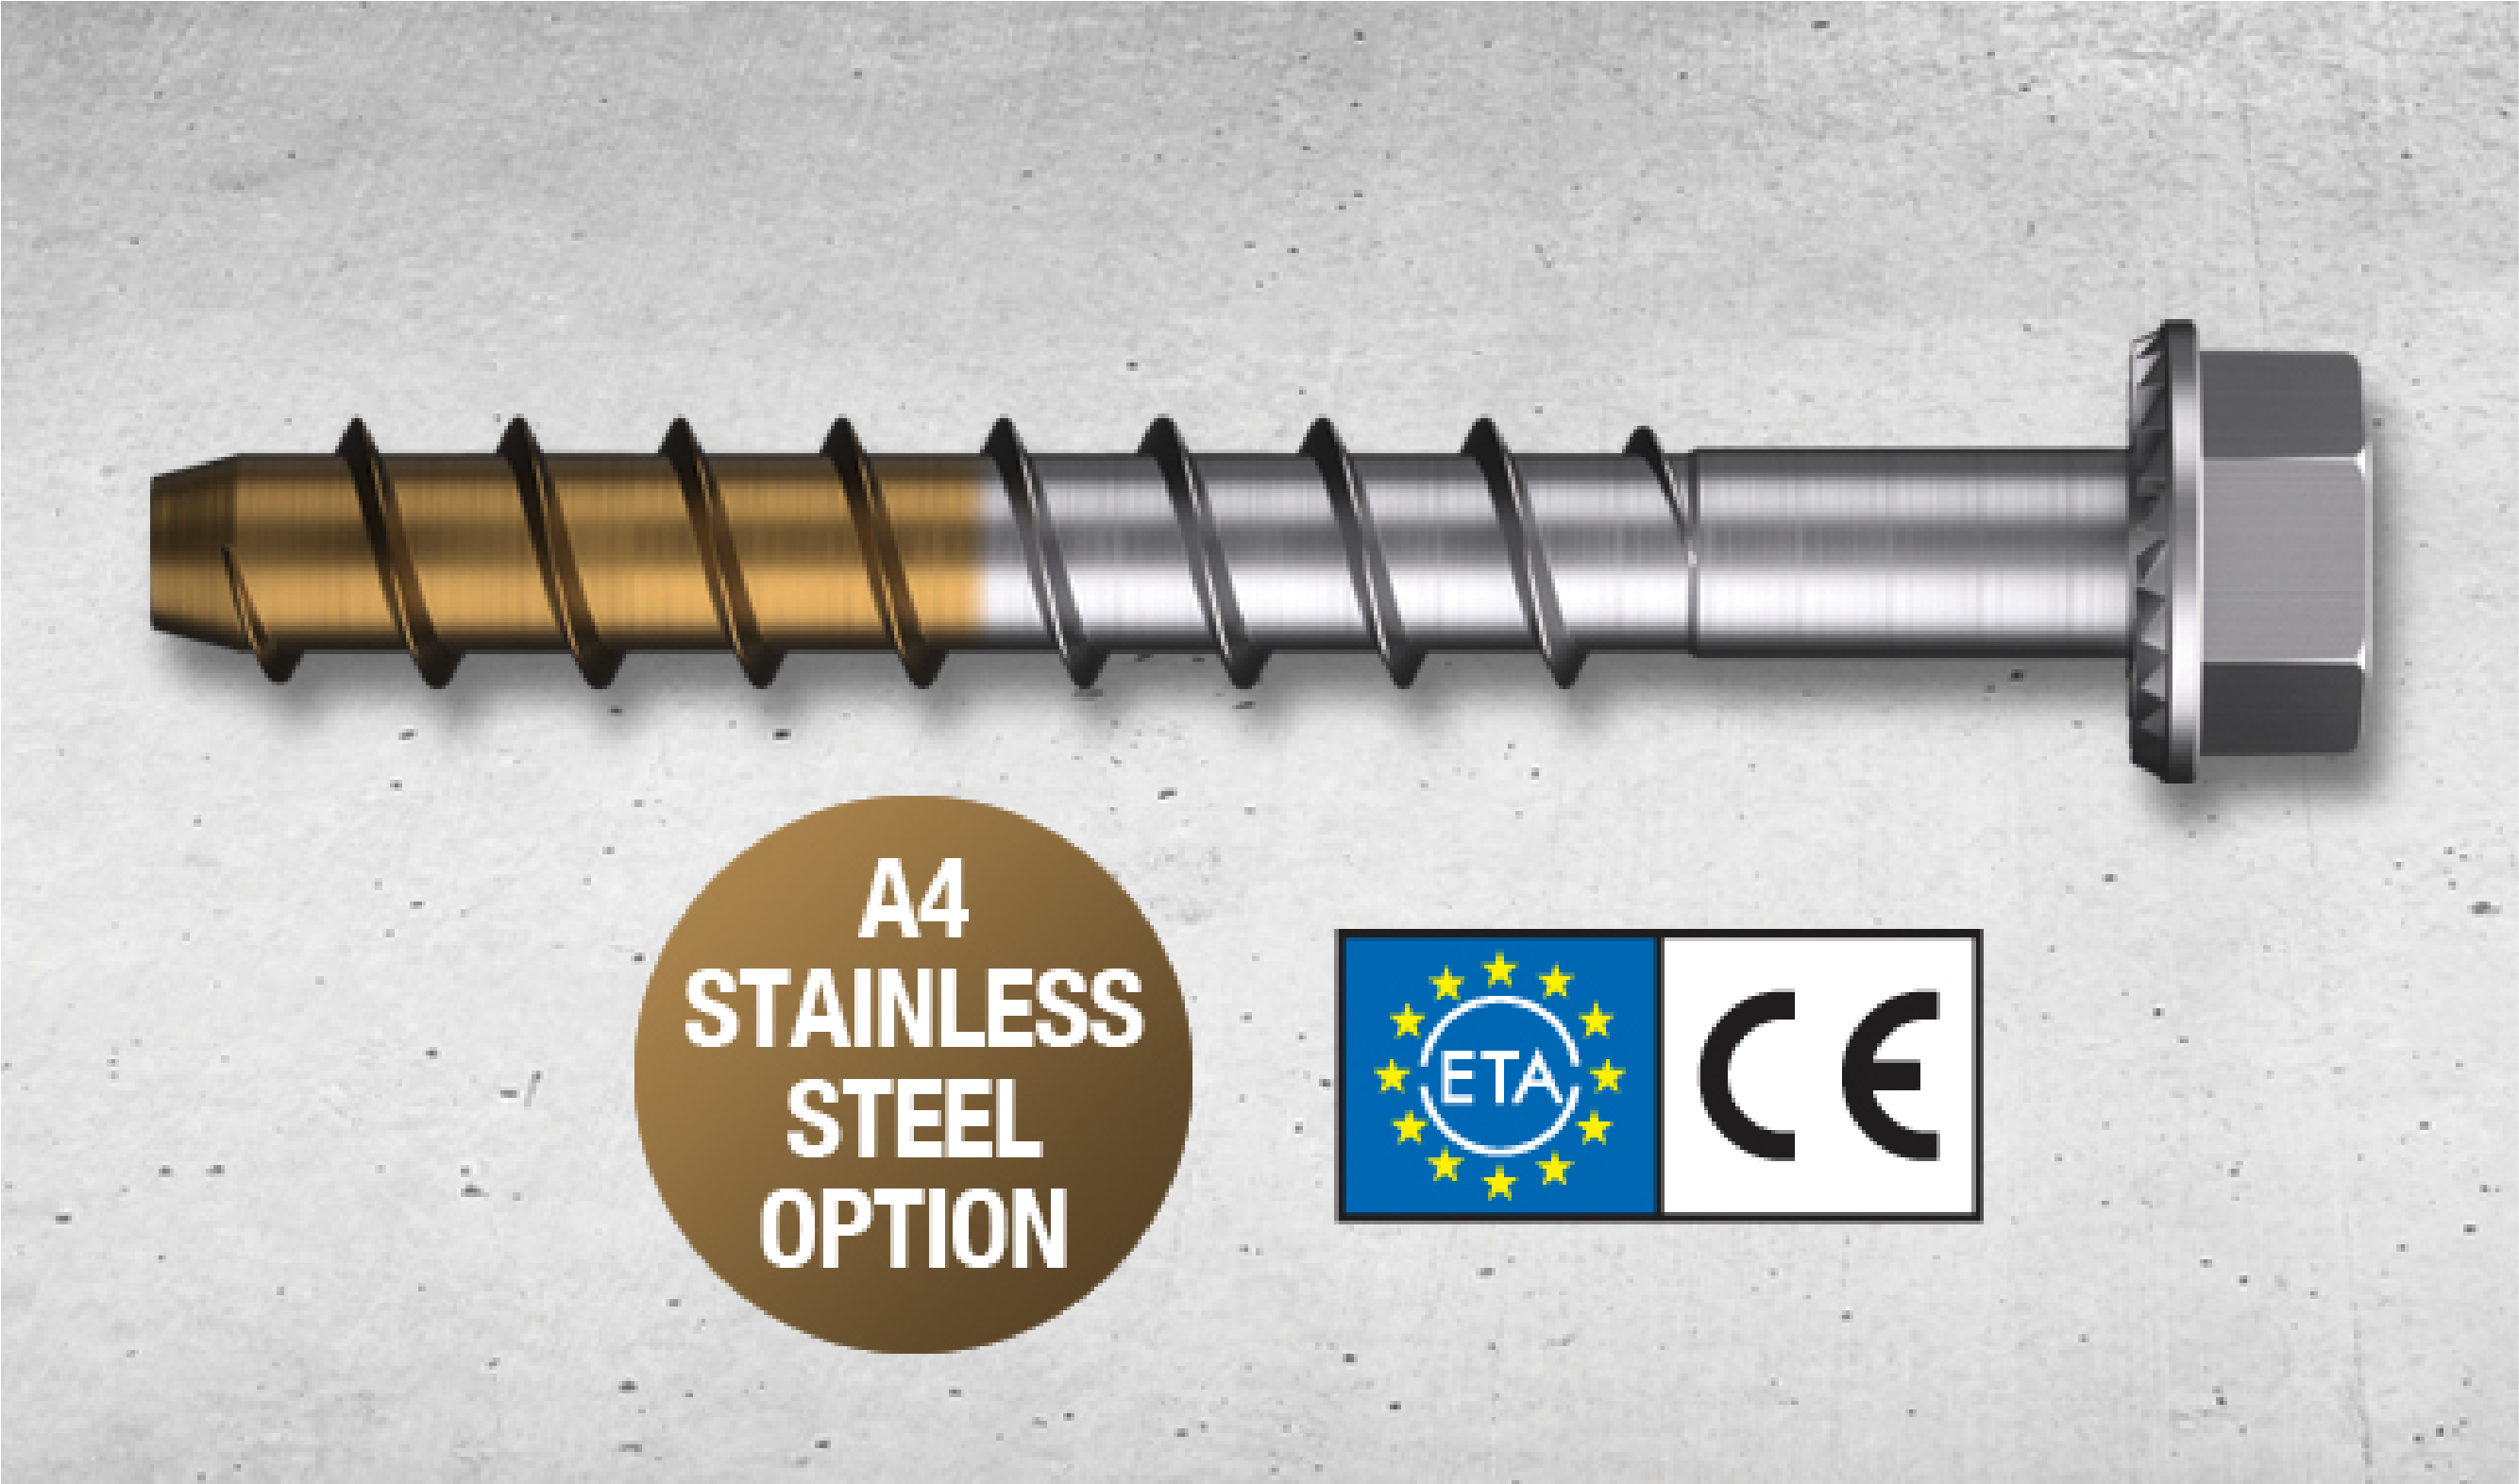 Concrete Screws A4 Stainless Steel - 640 x 377.png